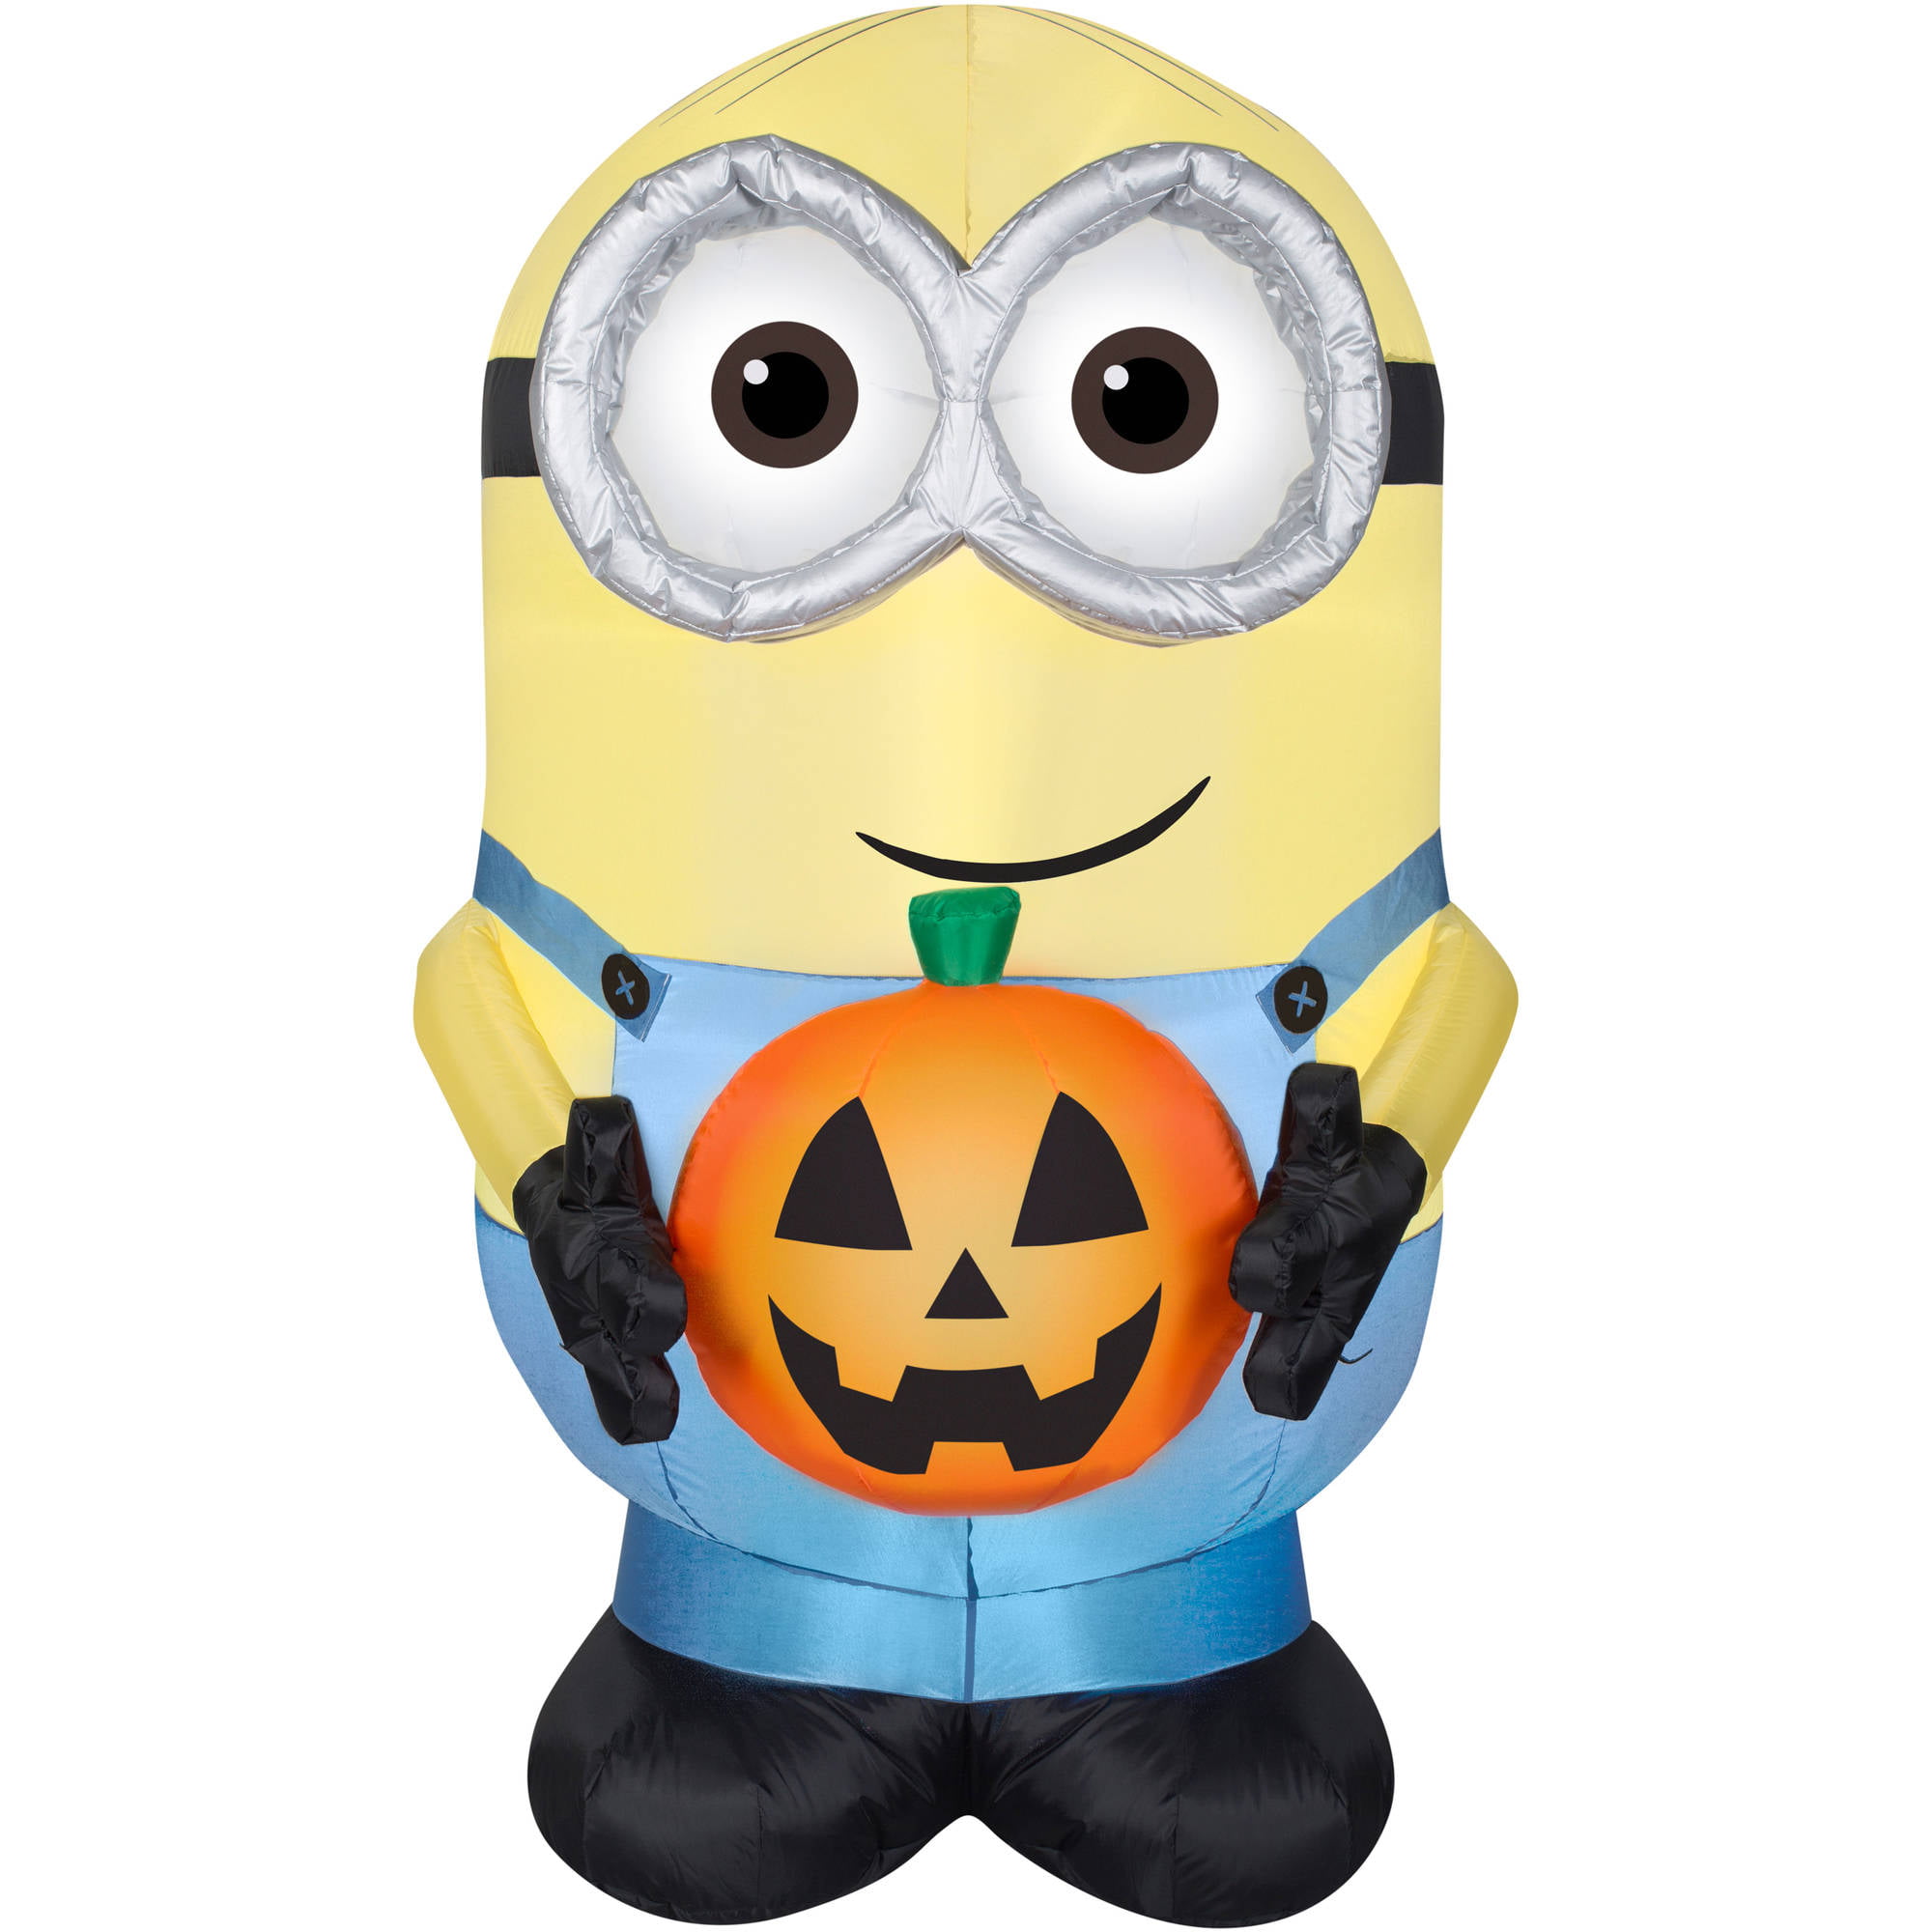  Minion  Halloween  Inflatables Best Decorations